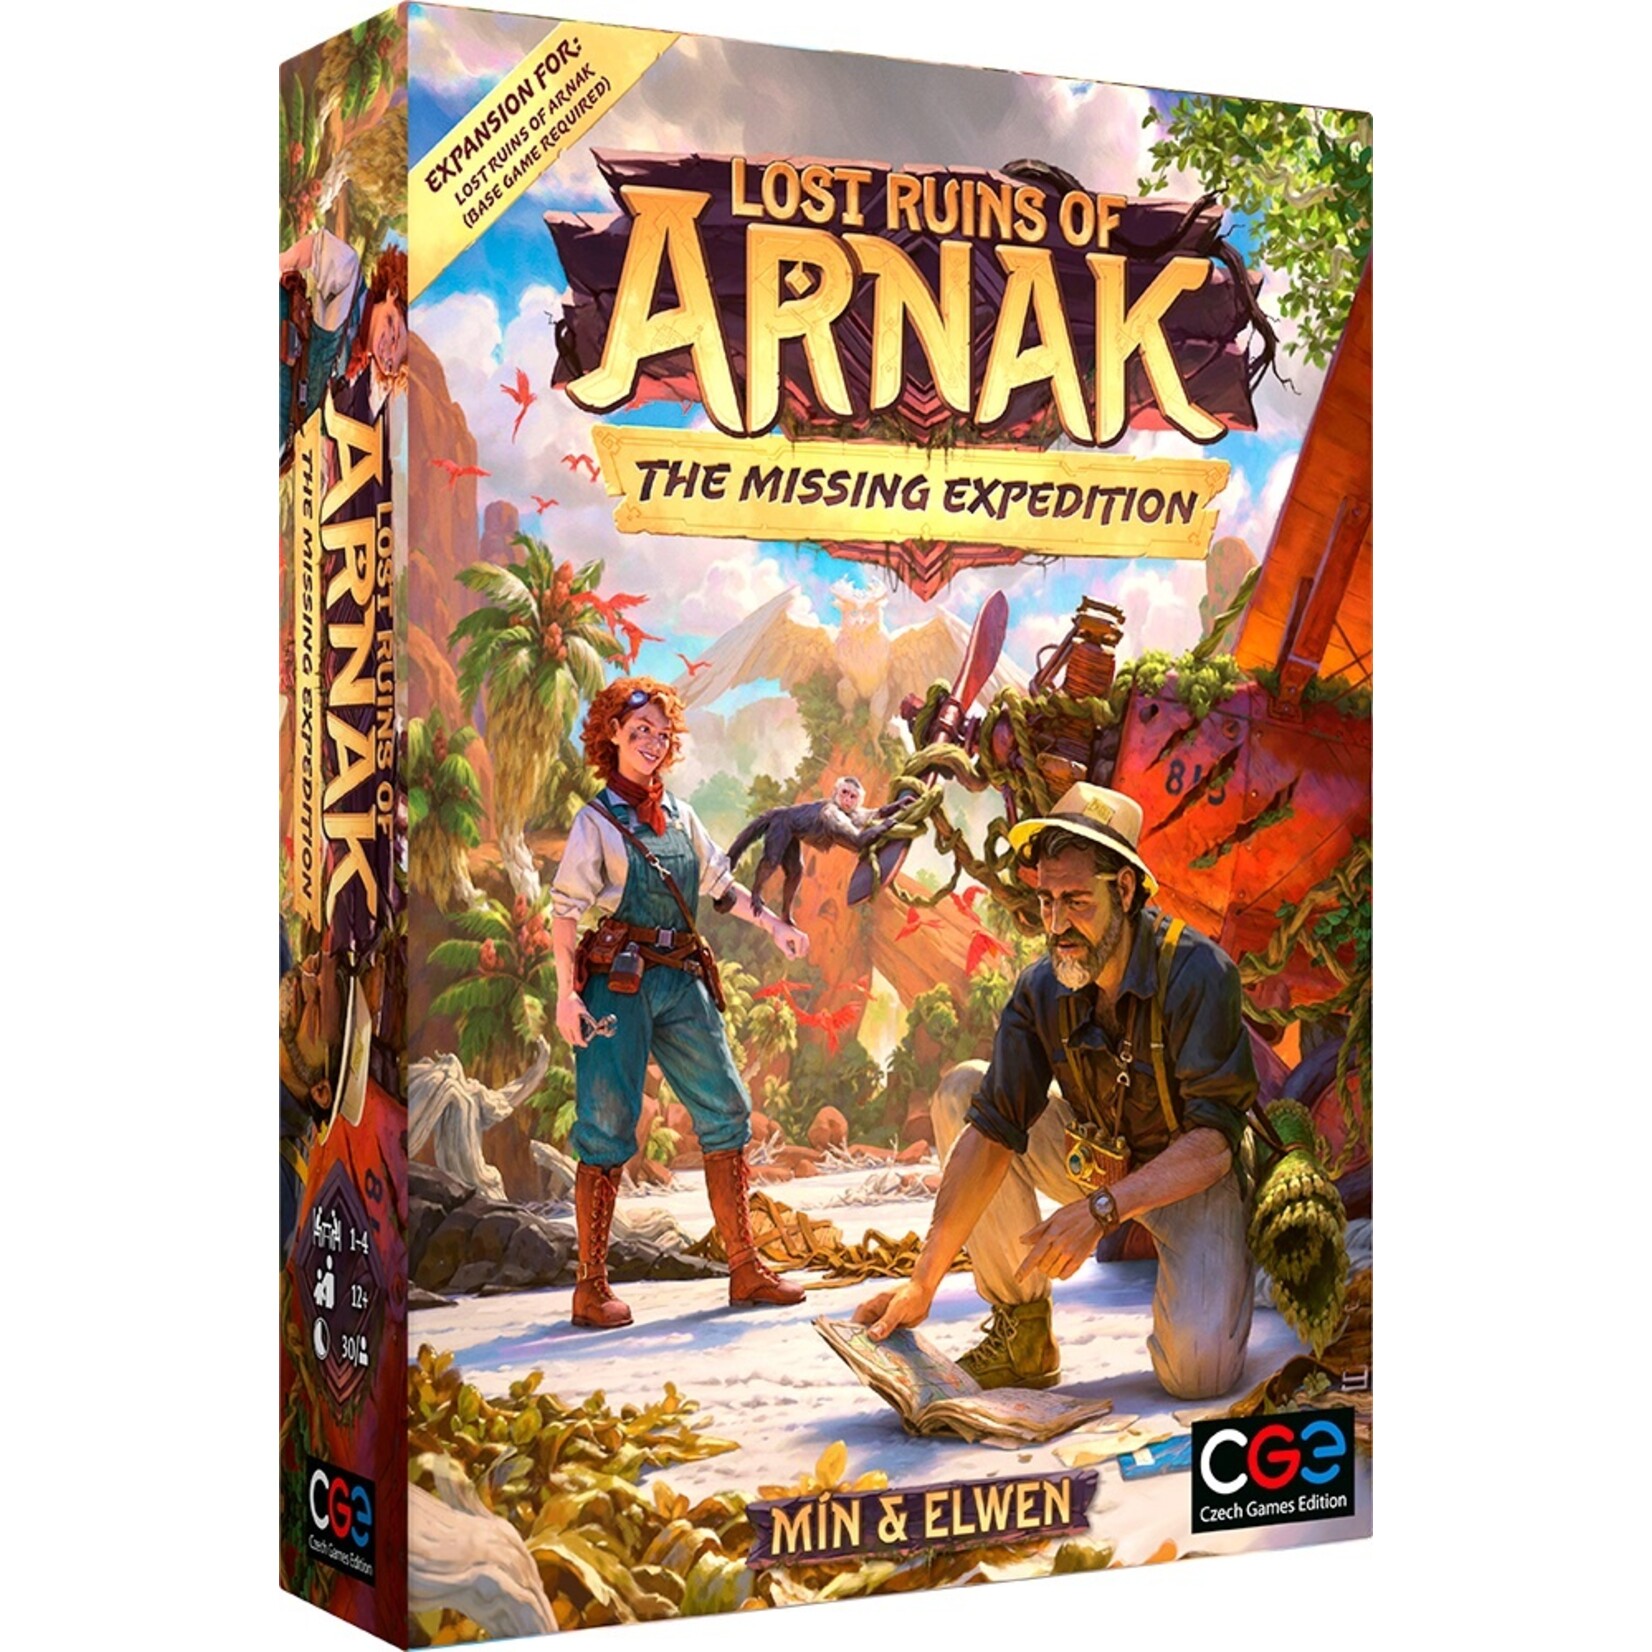 Czech Games Edition Lost Ruins Of Arnak: The Missing Expedition